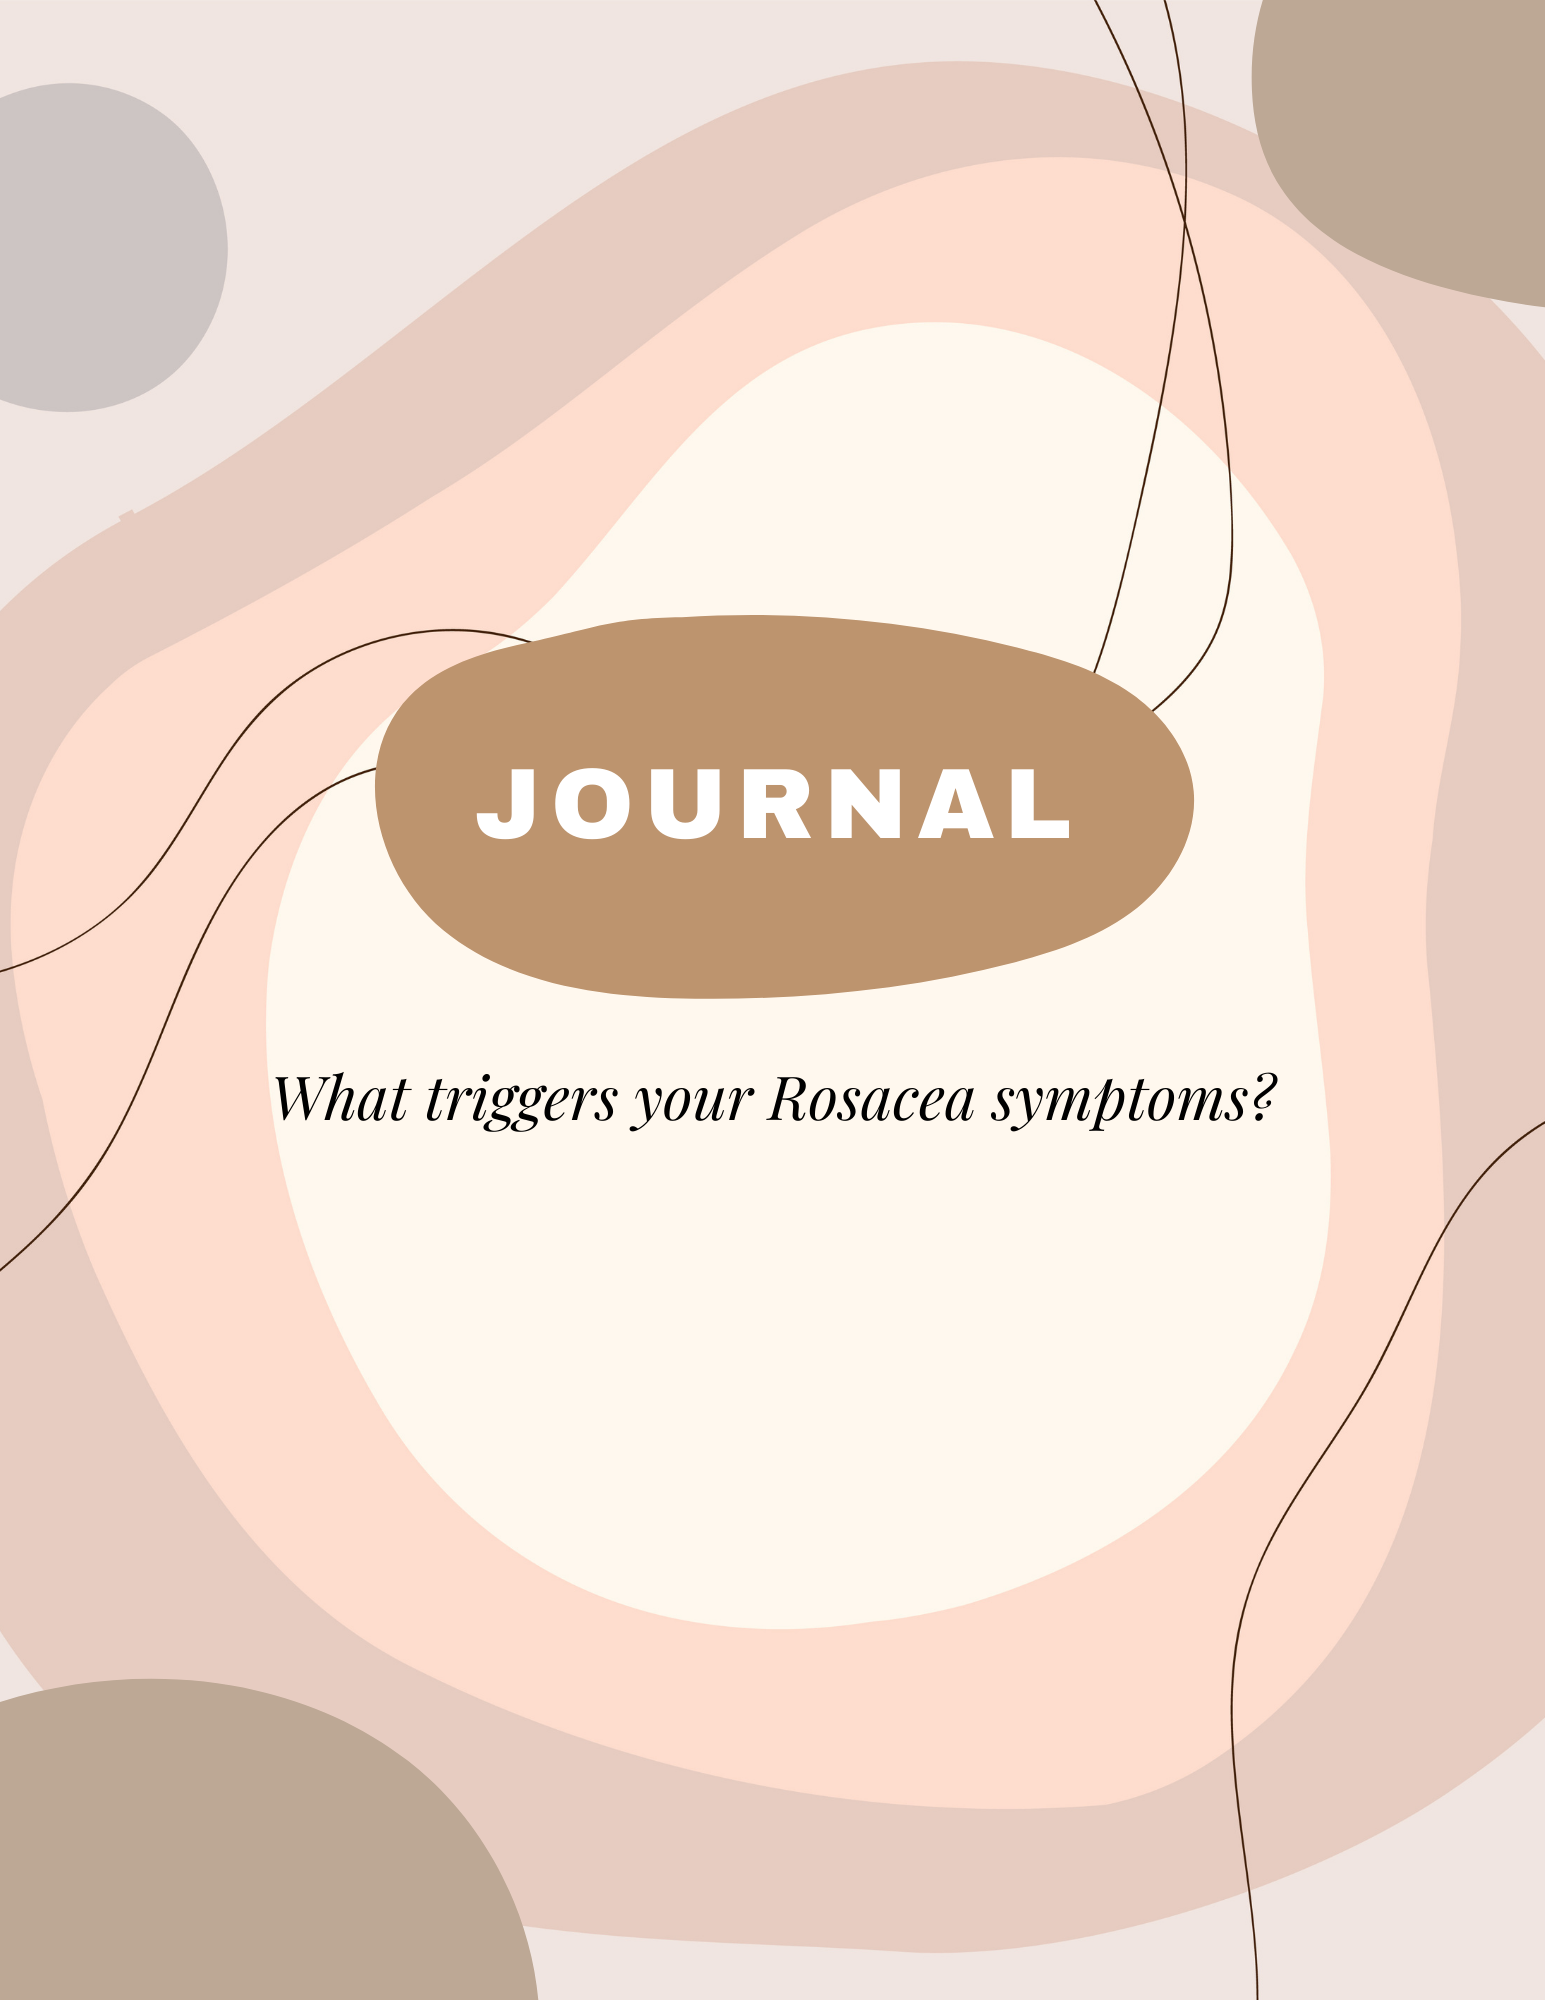 The image shows the front cover of the Rosacea Skin Triggers Journal